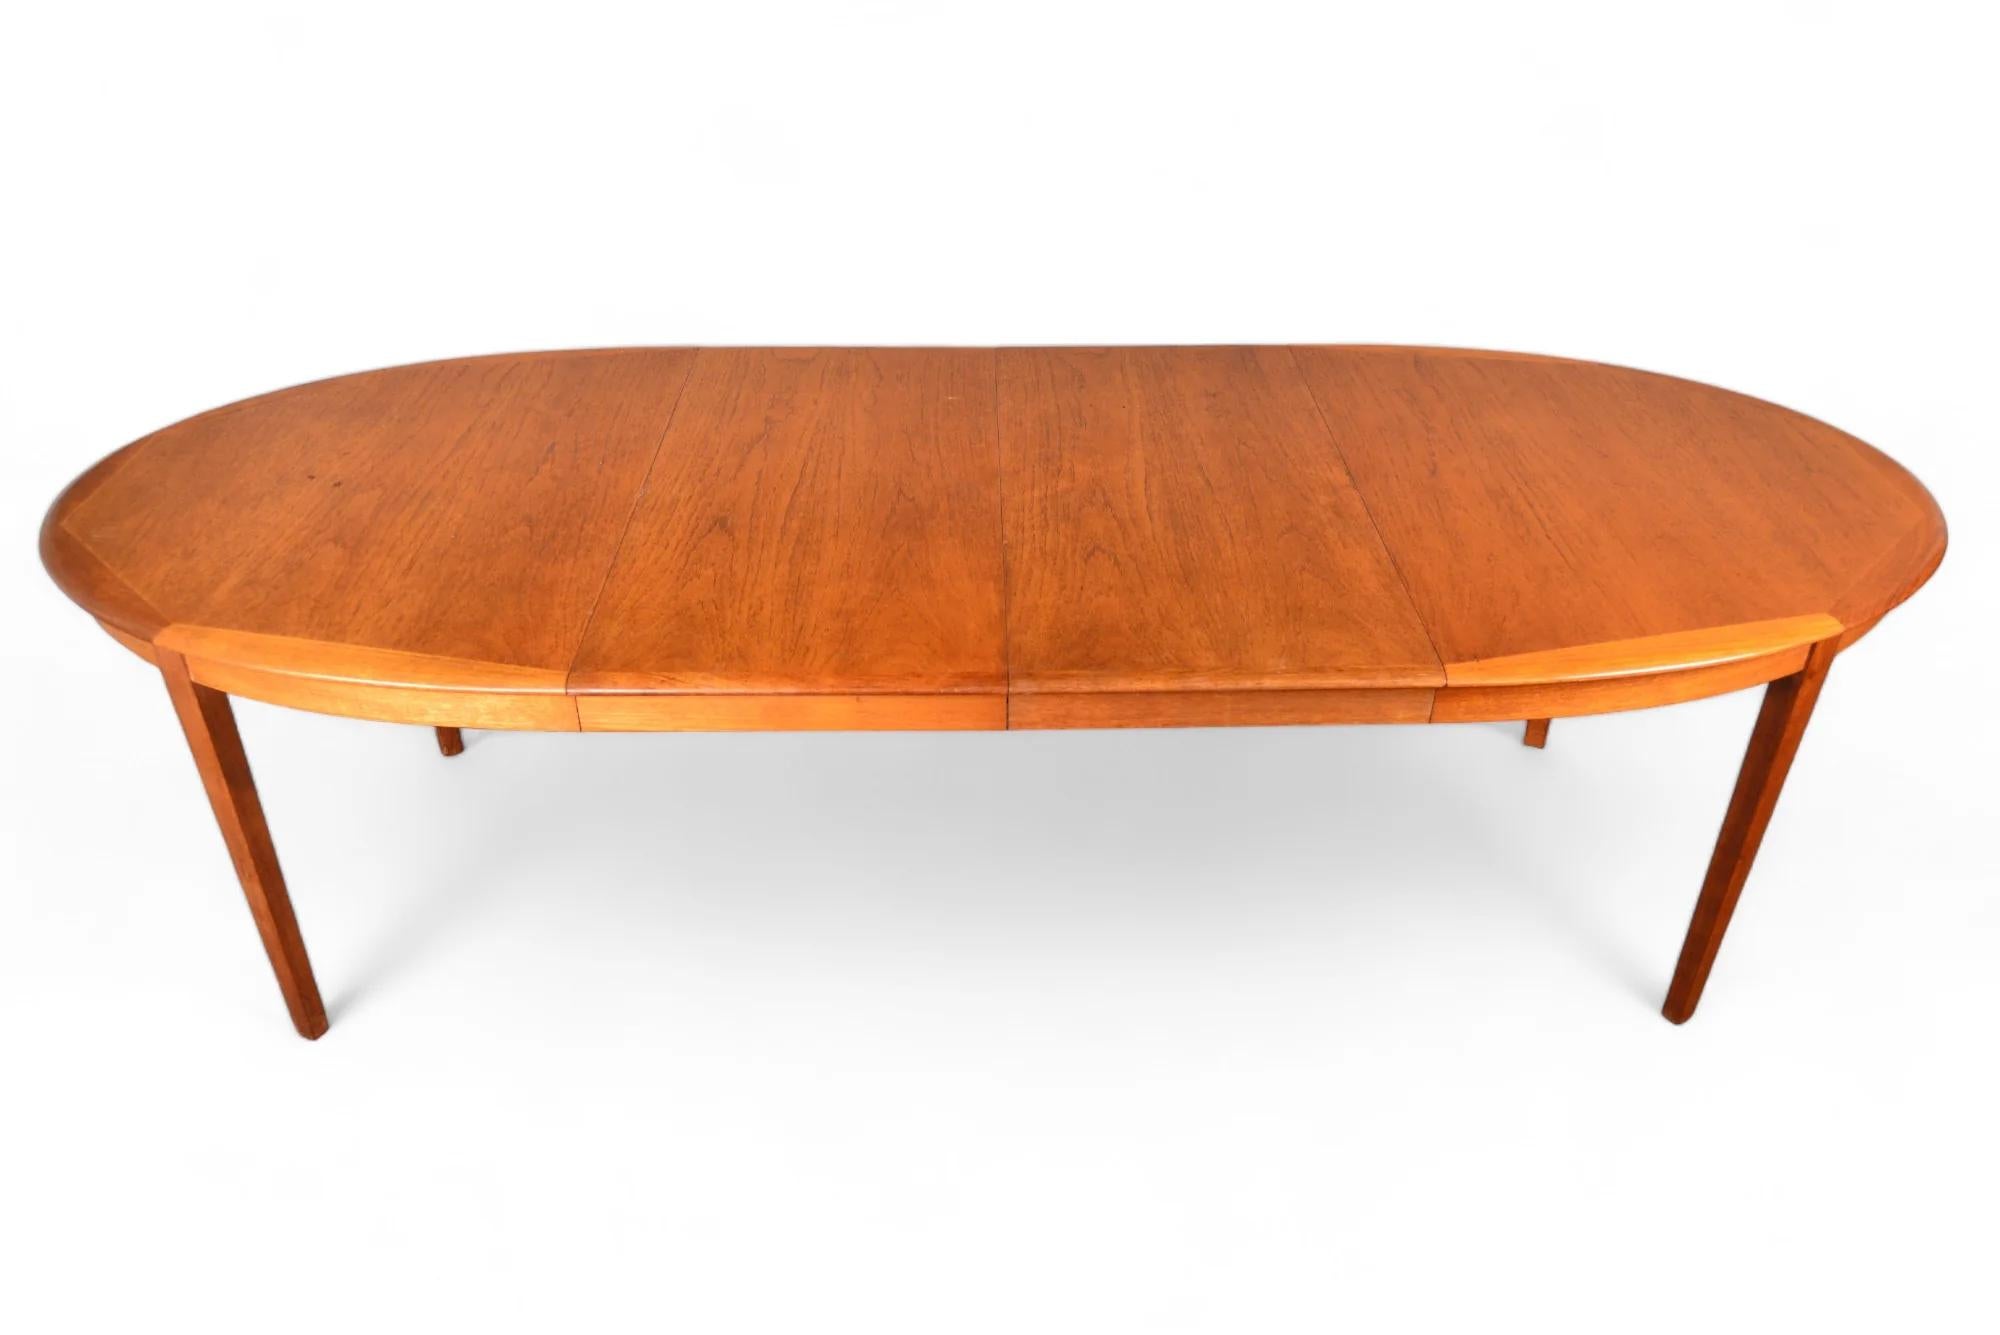 Danish Modern Oval Teak Dining Table + Two Leaves By Byrlund For Sale 2